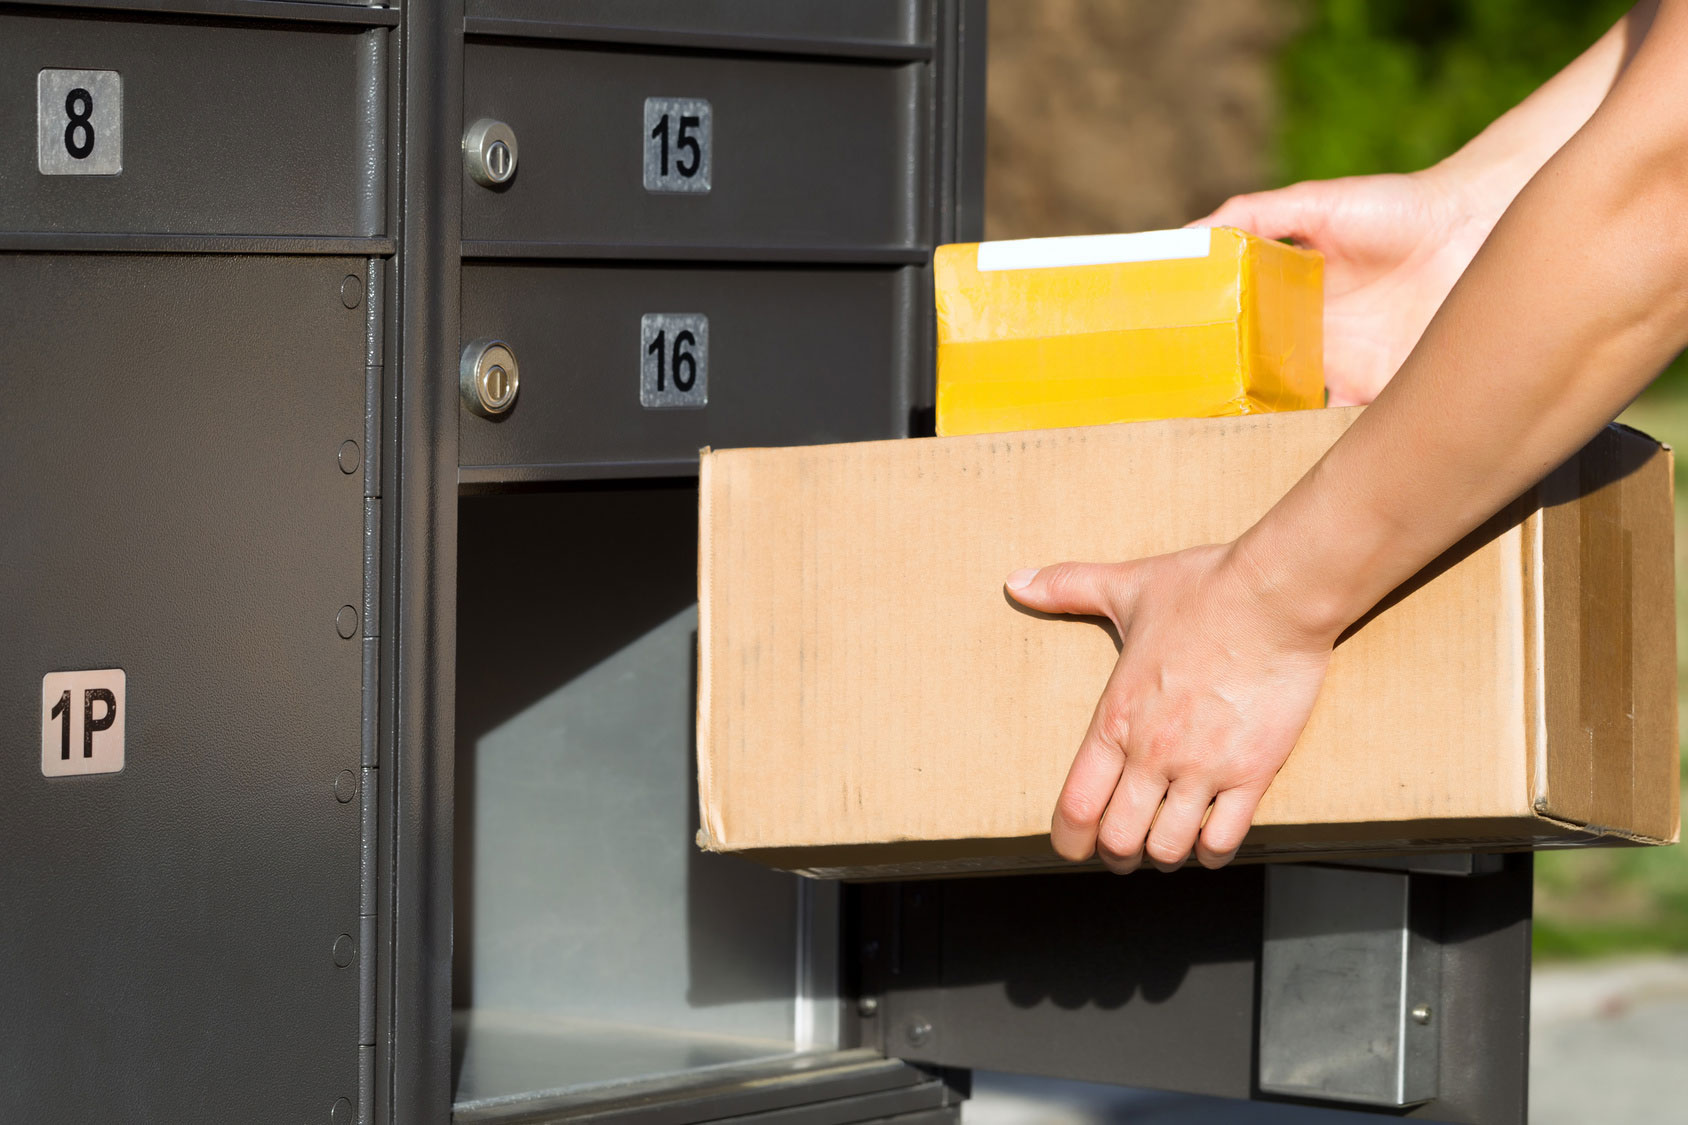 Most Interesting Postal Stories of 2015